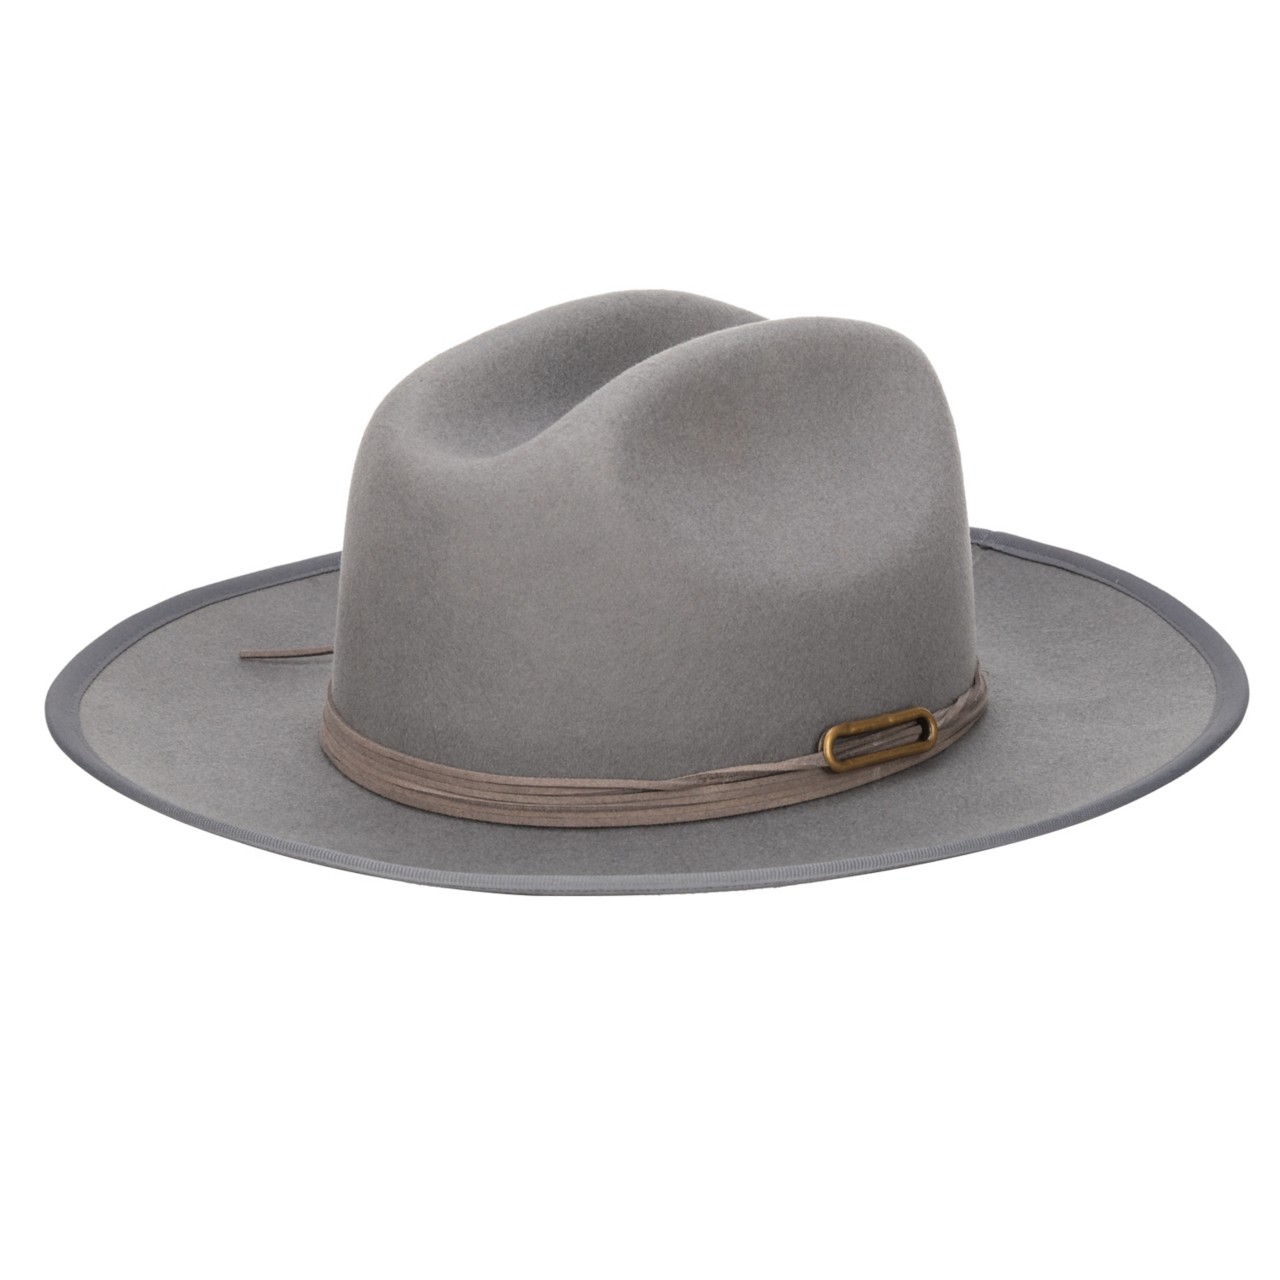 Image of western hat links to all western hats catalog.